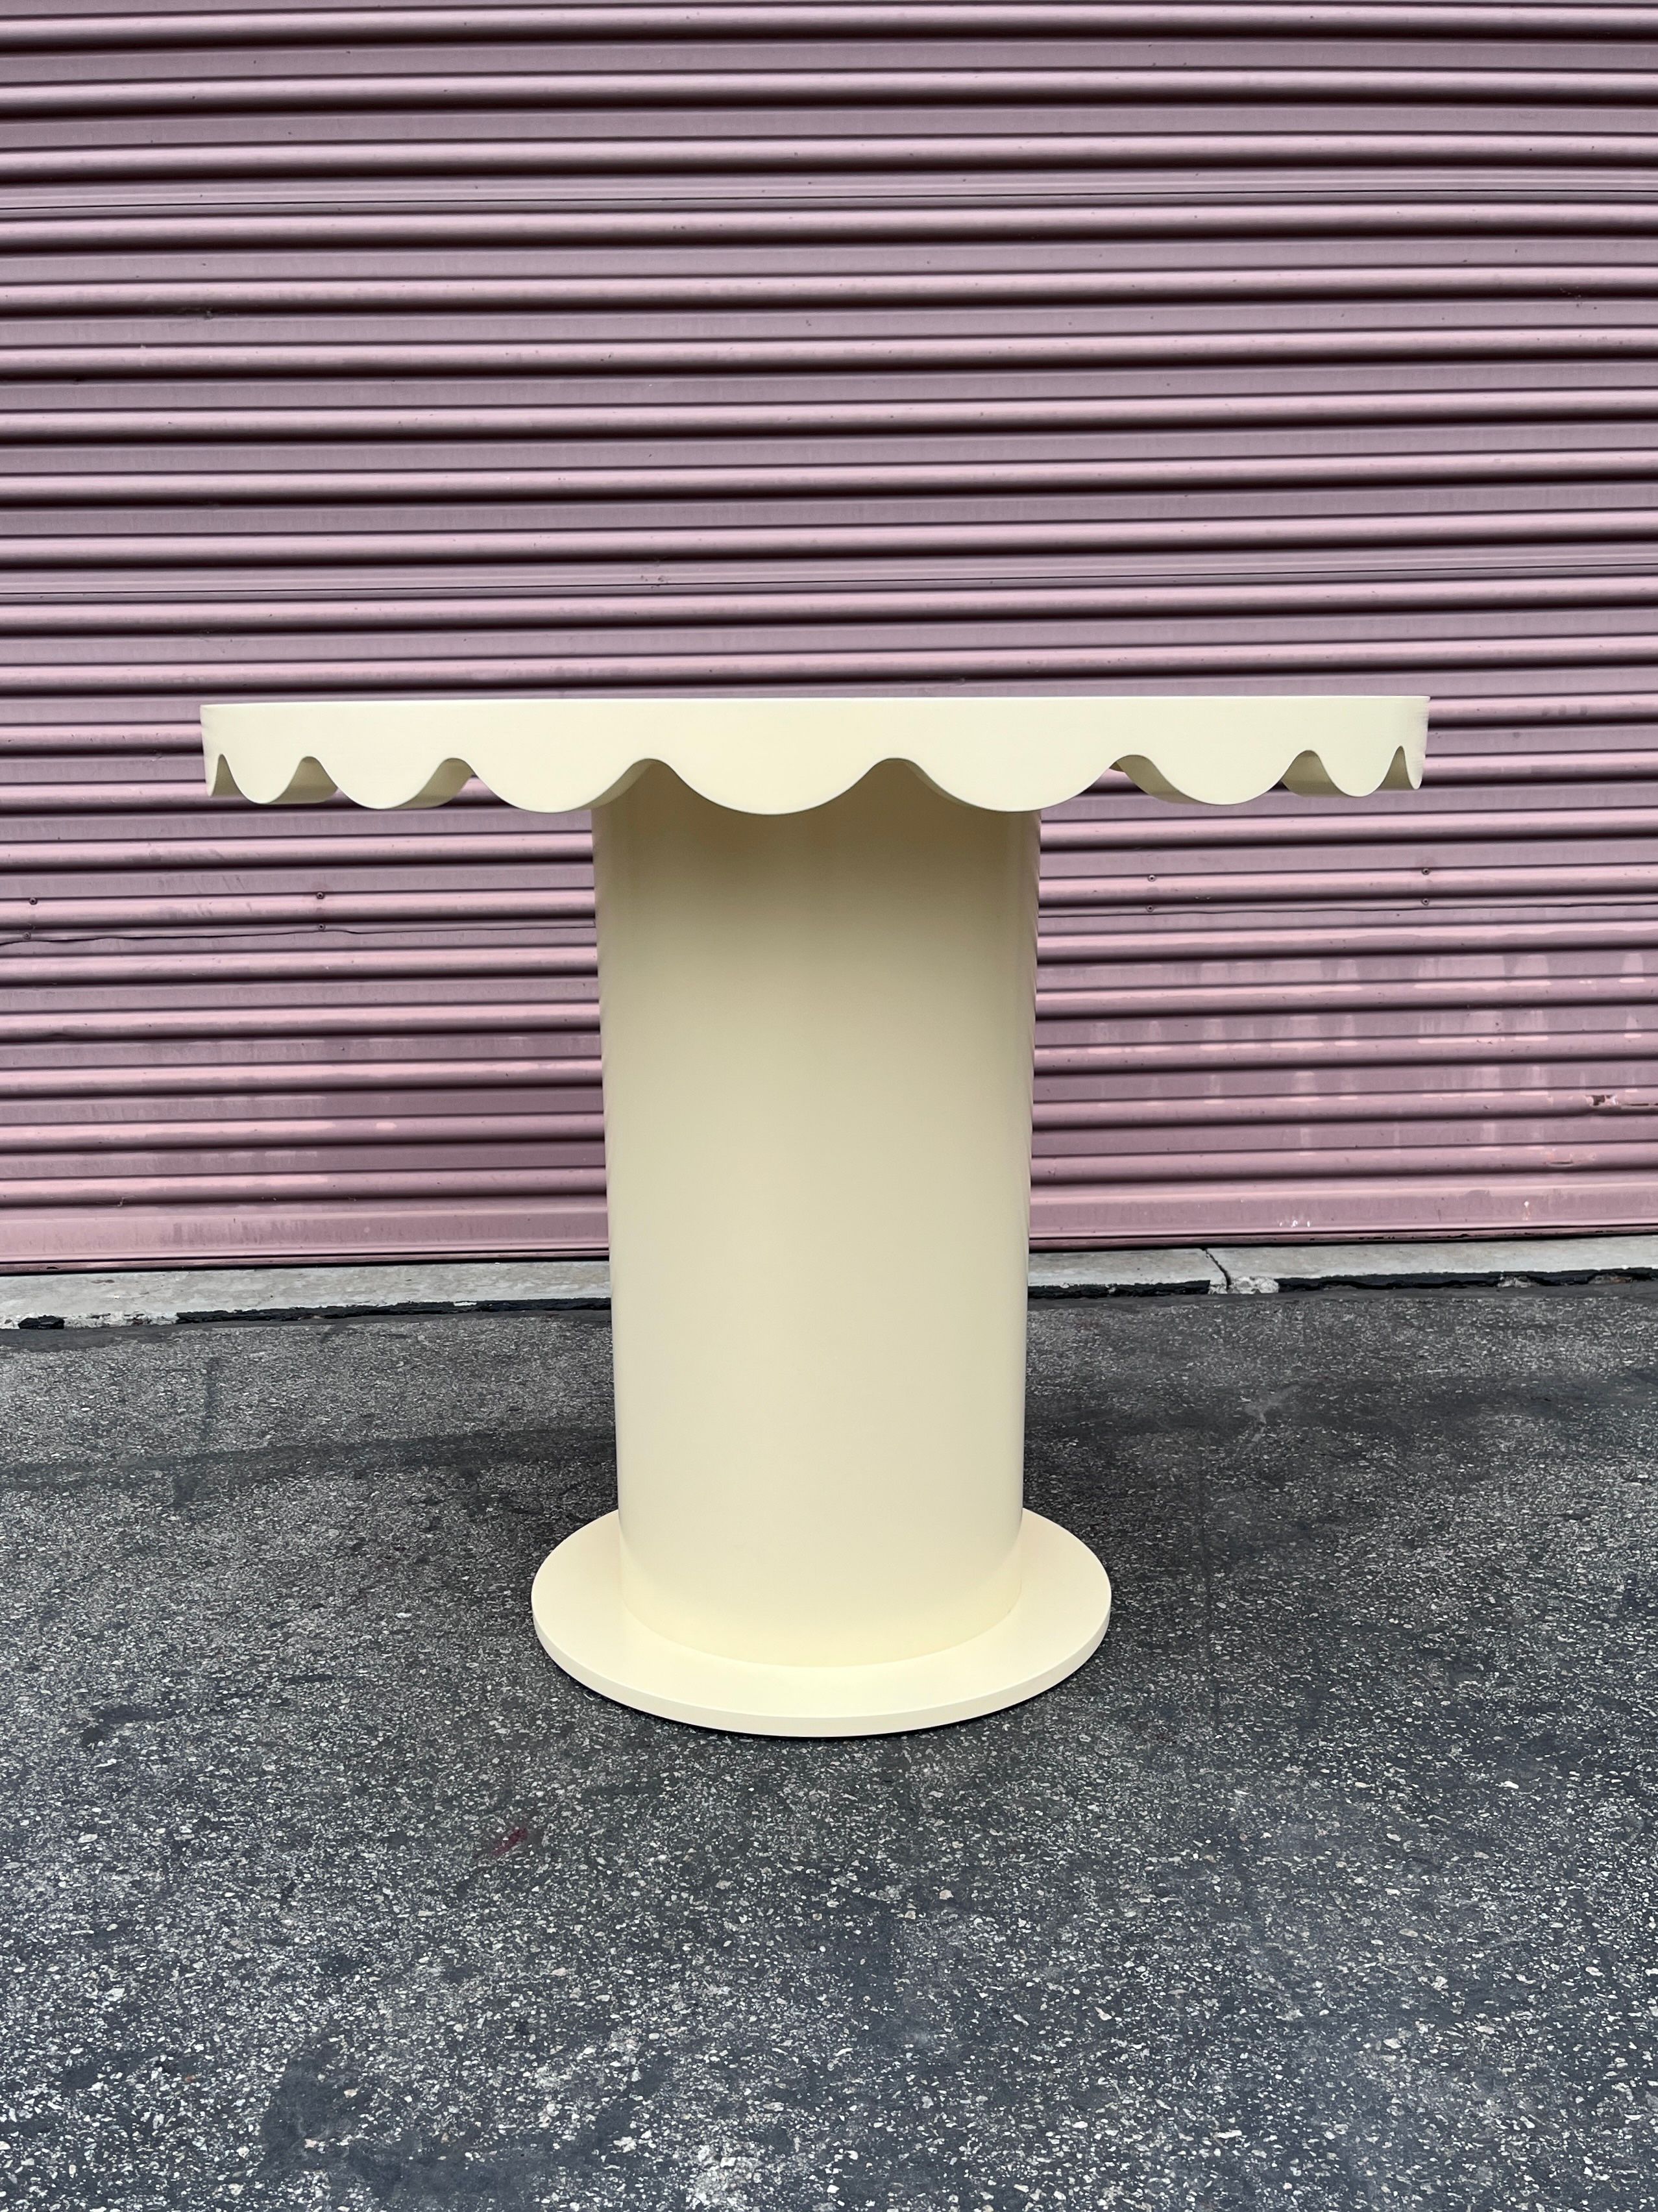  Scallop Skirt Table - Beige product image 2